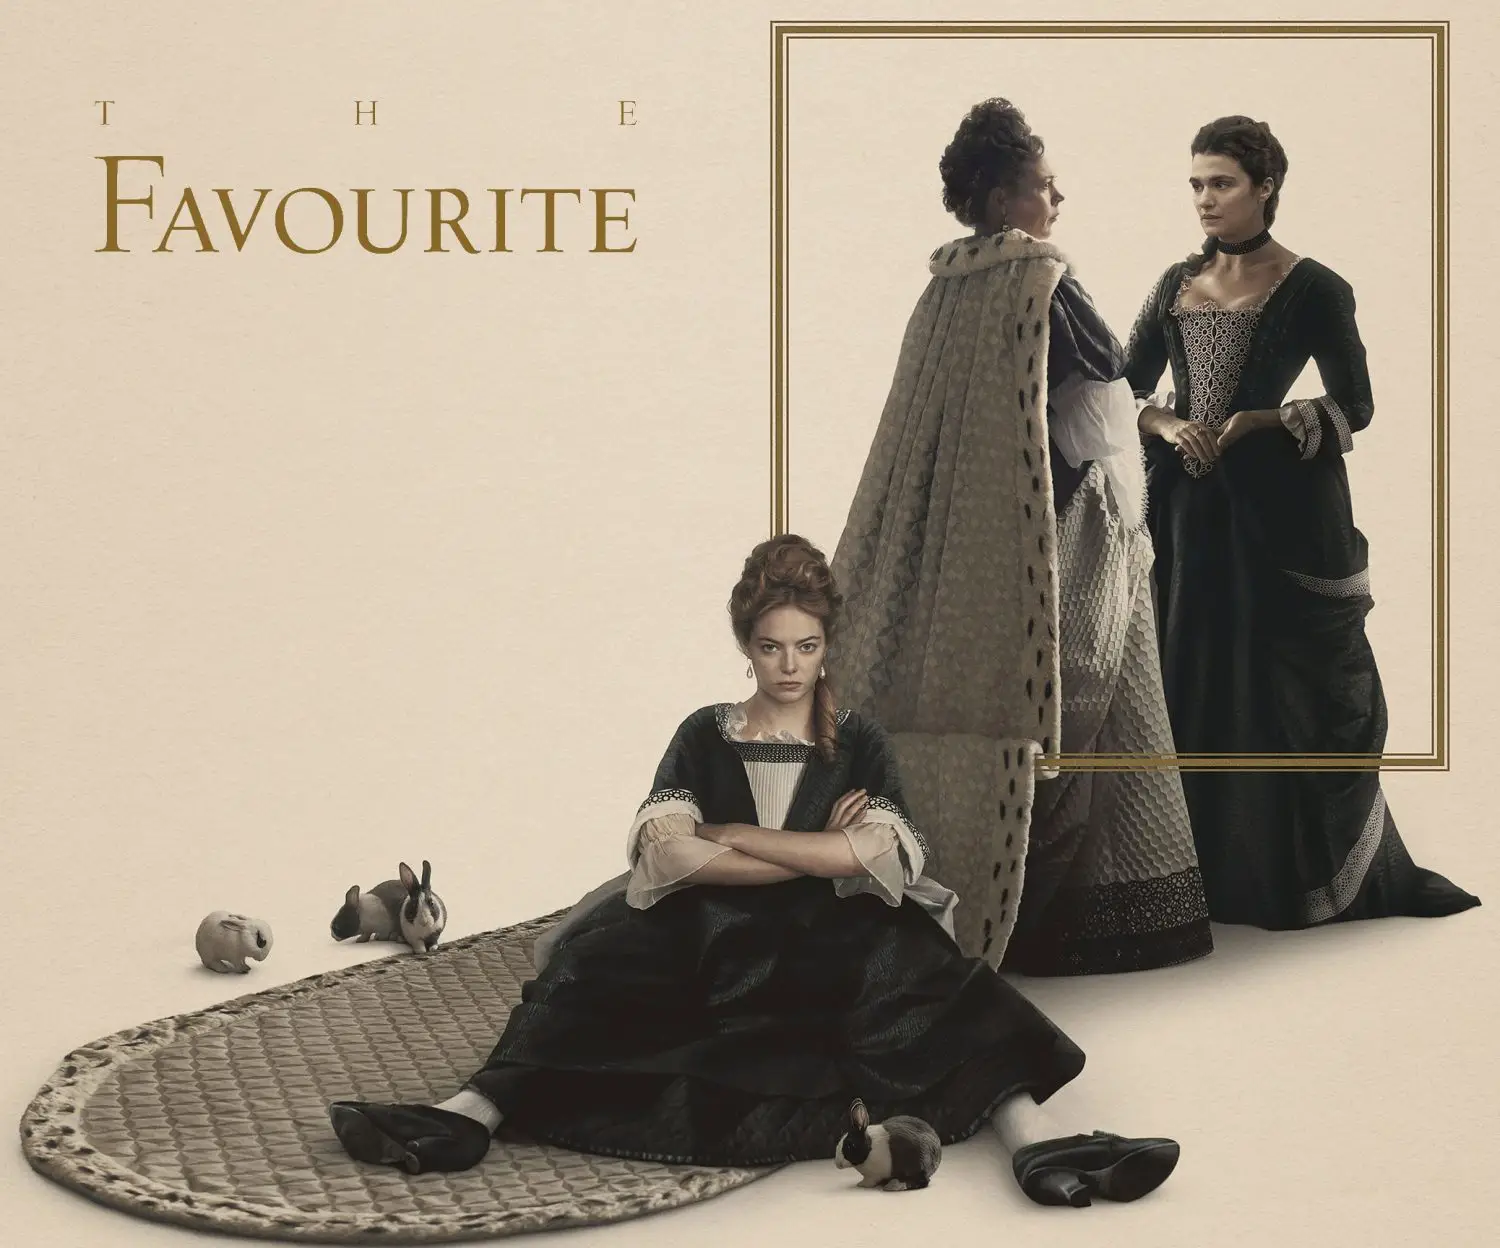 The Favourite | Reactions | LIVING LIFE FEARLESS